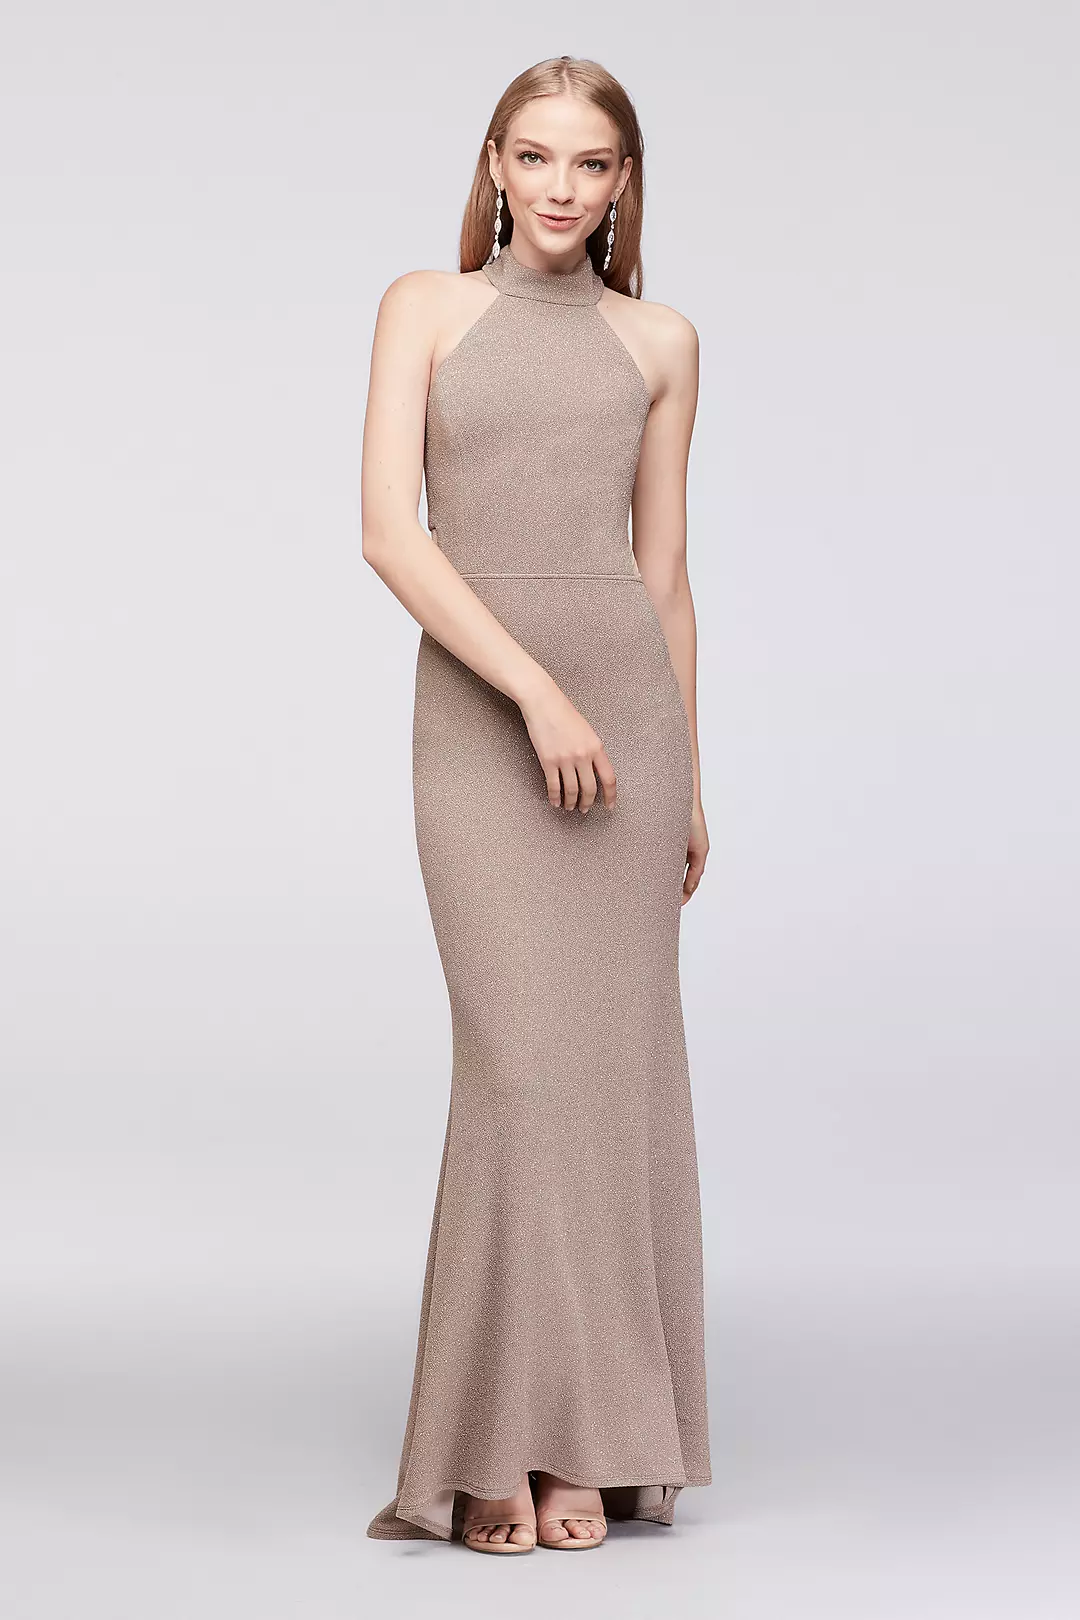 Textured Glitter Sheath Gown with Fishtail Hem Image